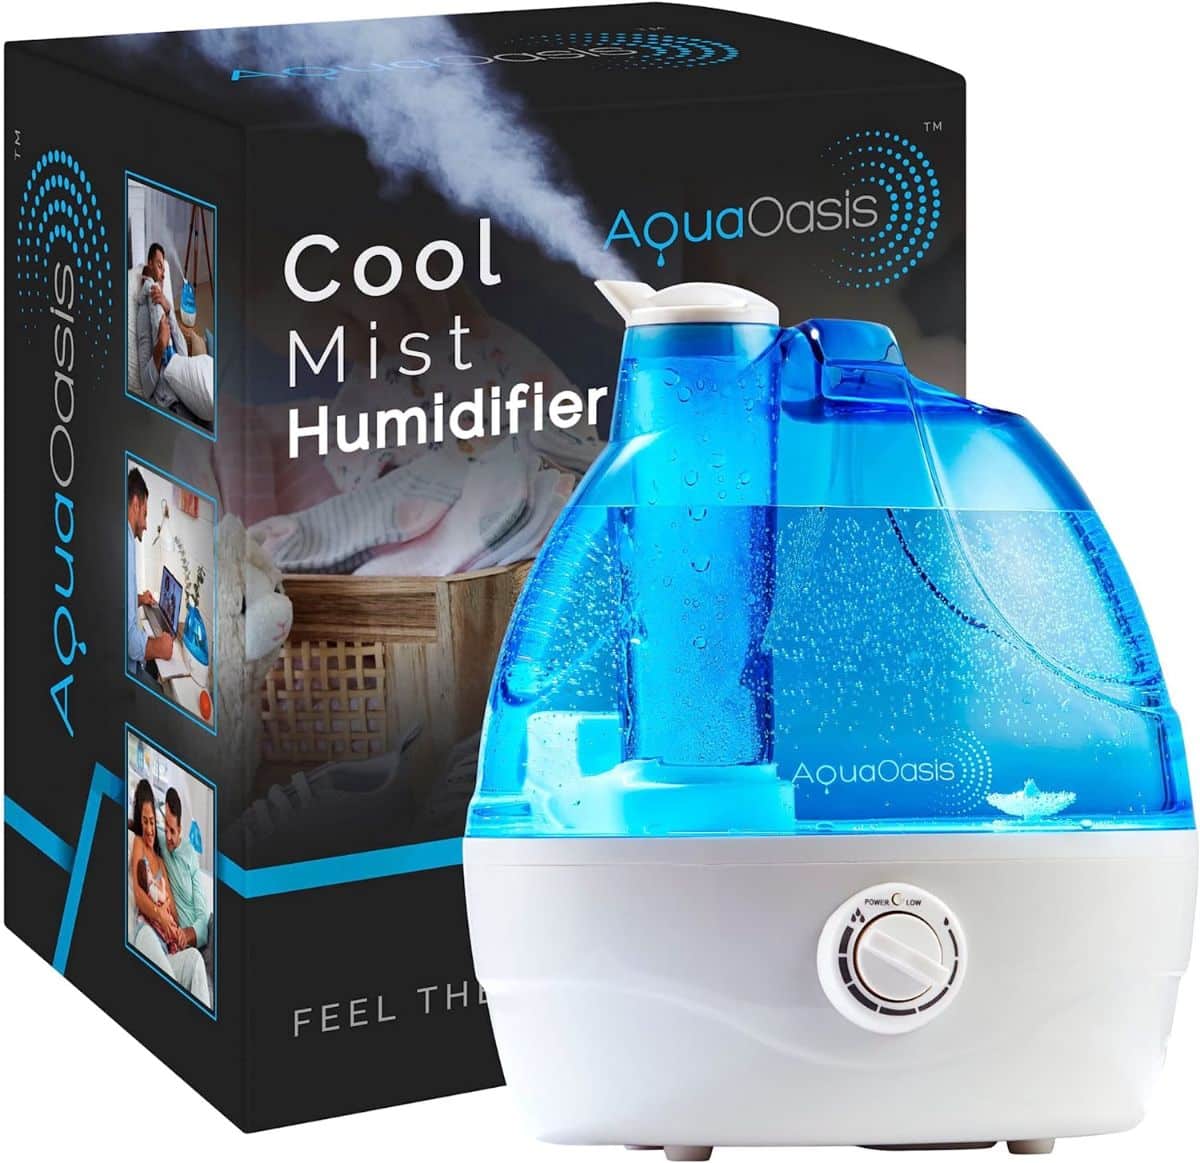 AquaOasis humidifier is recommended for large rooms